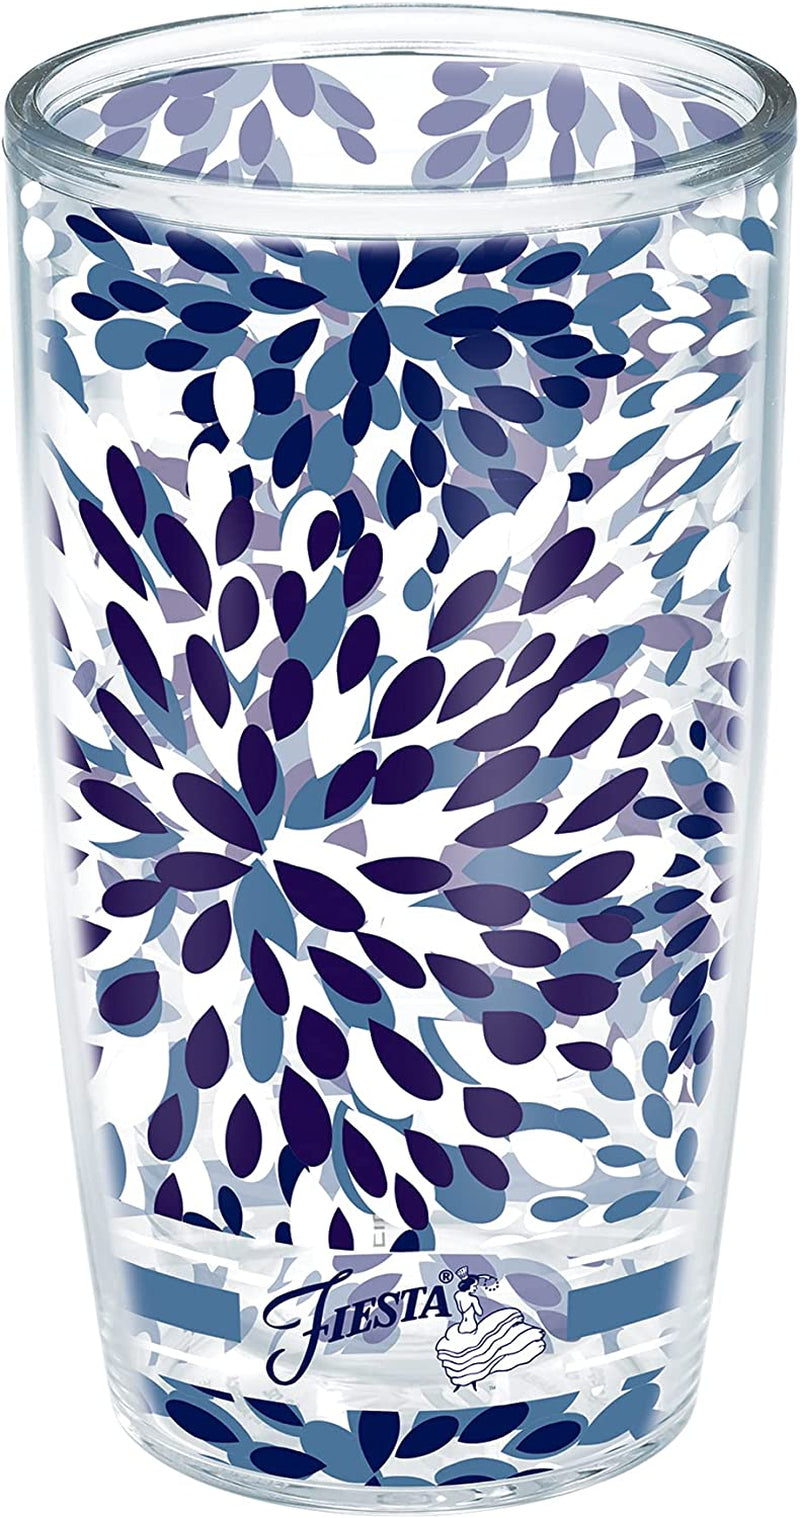 Tervis Made in USA Double Walled Fiesta Insulated Tumbler Cup Keeps Drinks Cold & Hot, 16Oz - 2Pk, Lapis Calypso Home & Garden > Kitchen & Dining > Tableware > Drinkware Tervis Tumbler Company Unlidded 16oz 